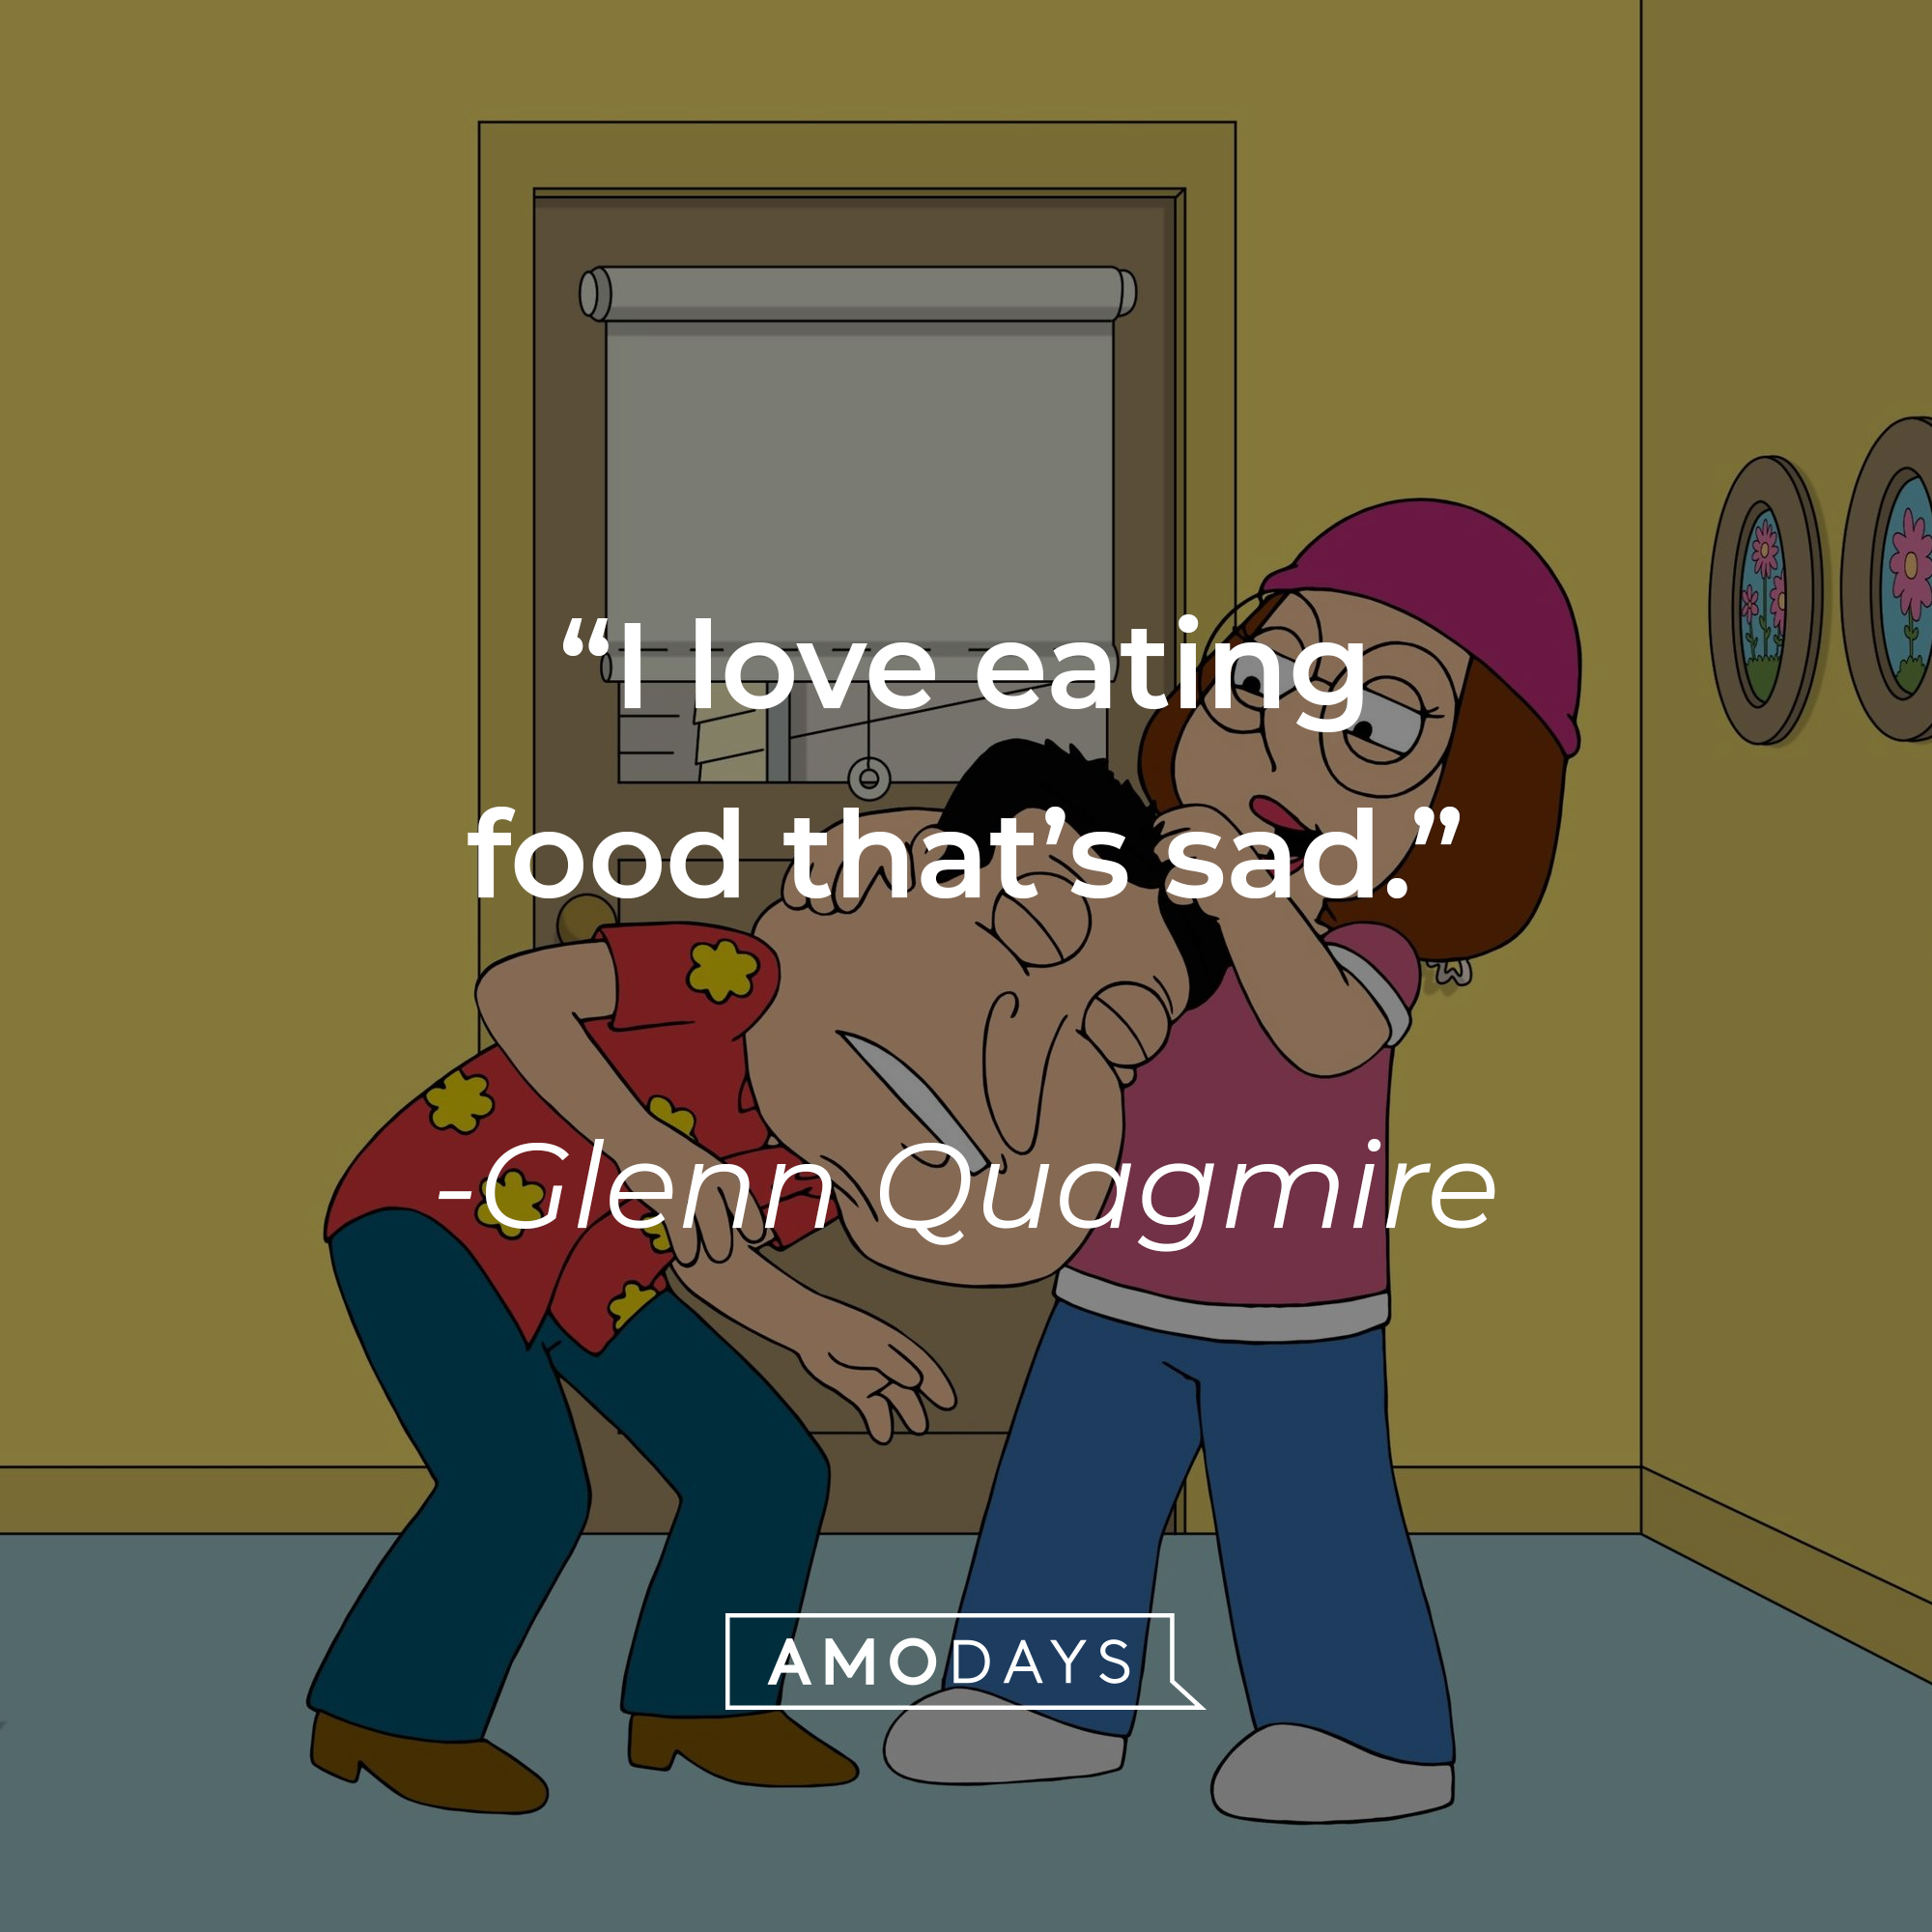 Glenn Quagmire with his quote: “I love eating food that’s sad.” | Source: facebook.com/FamilyGuy